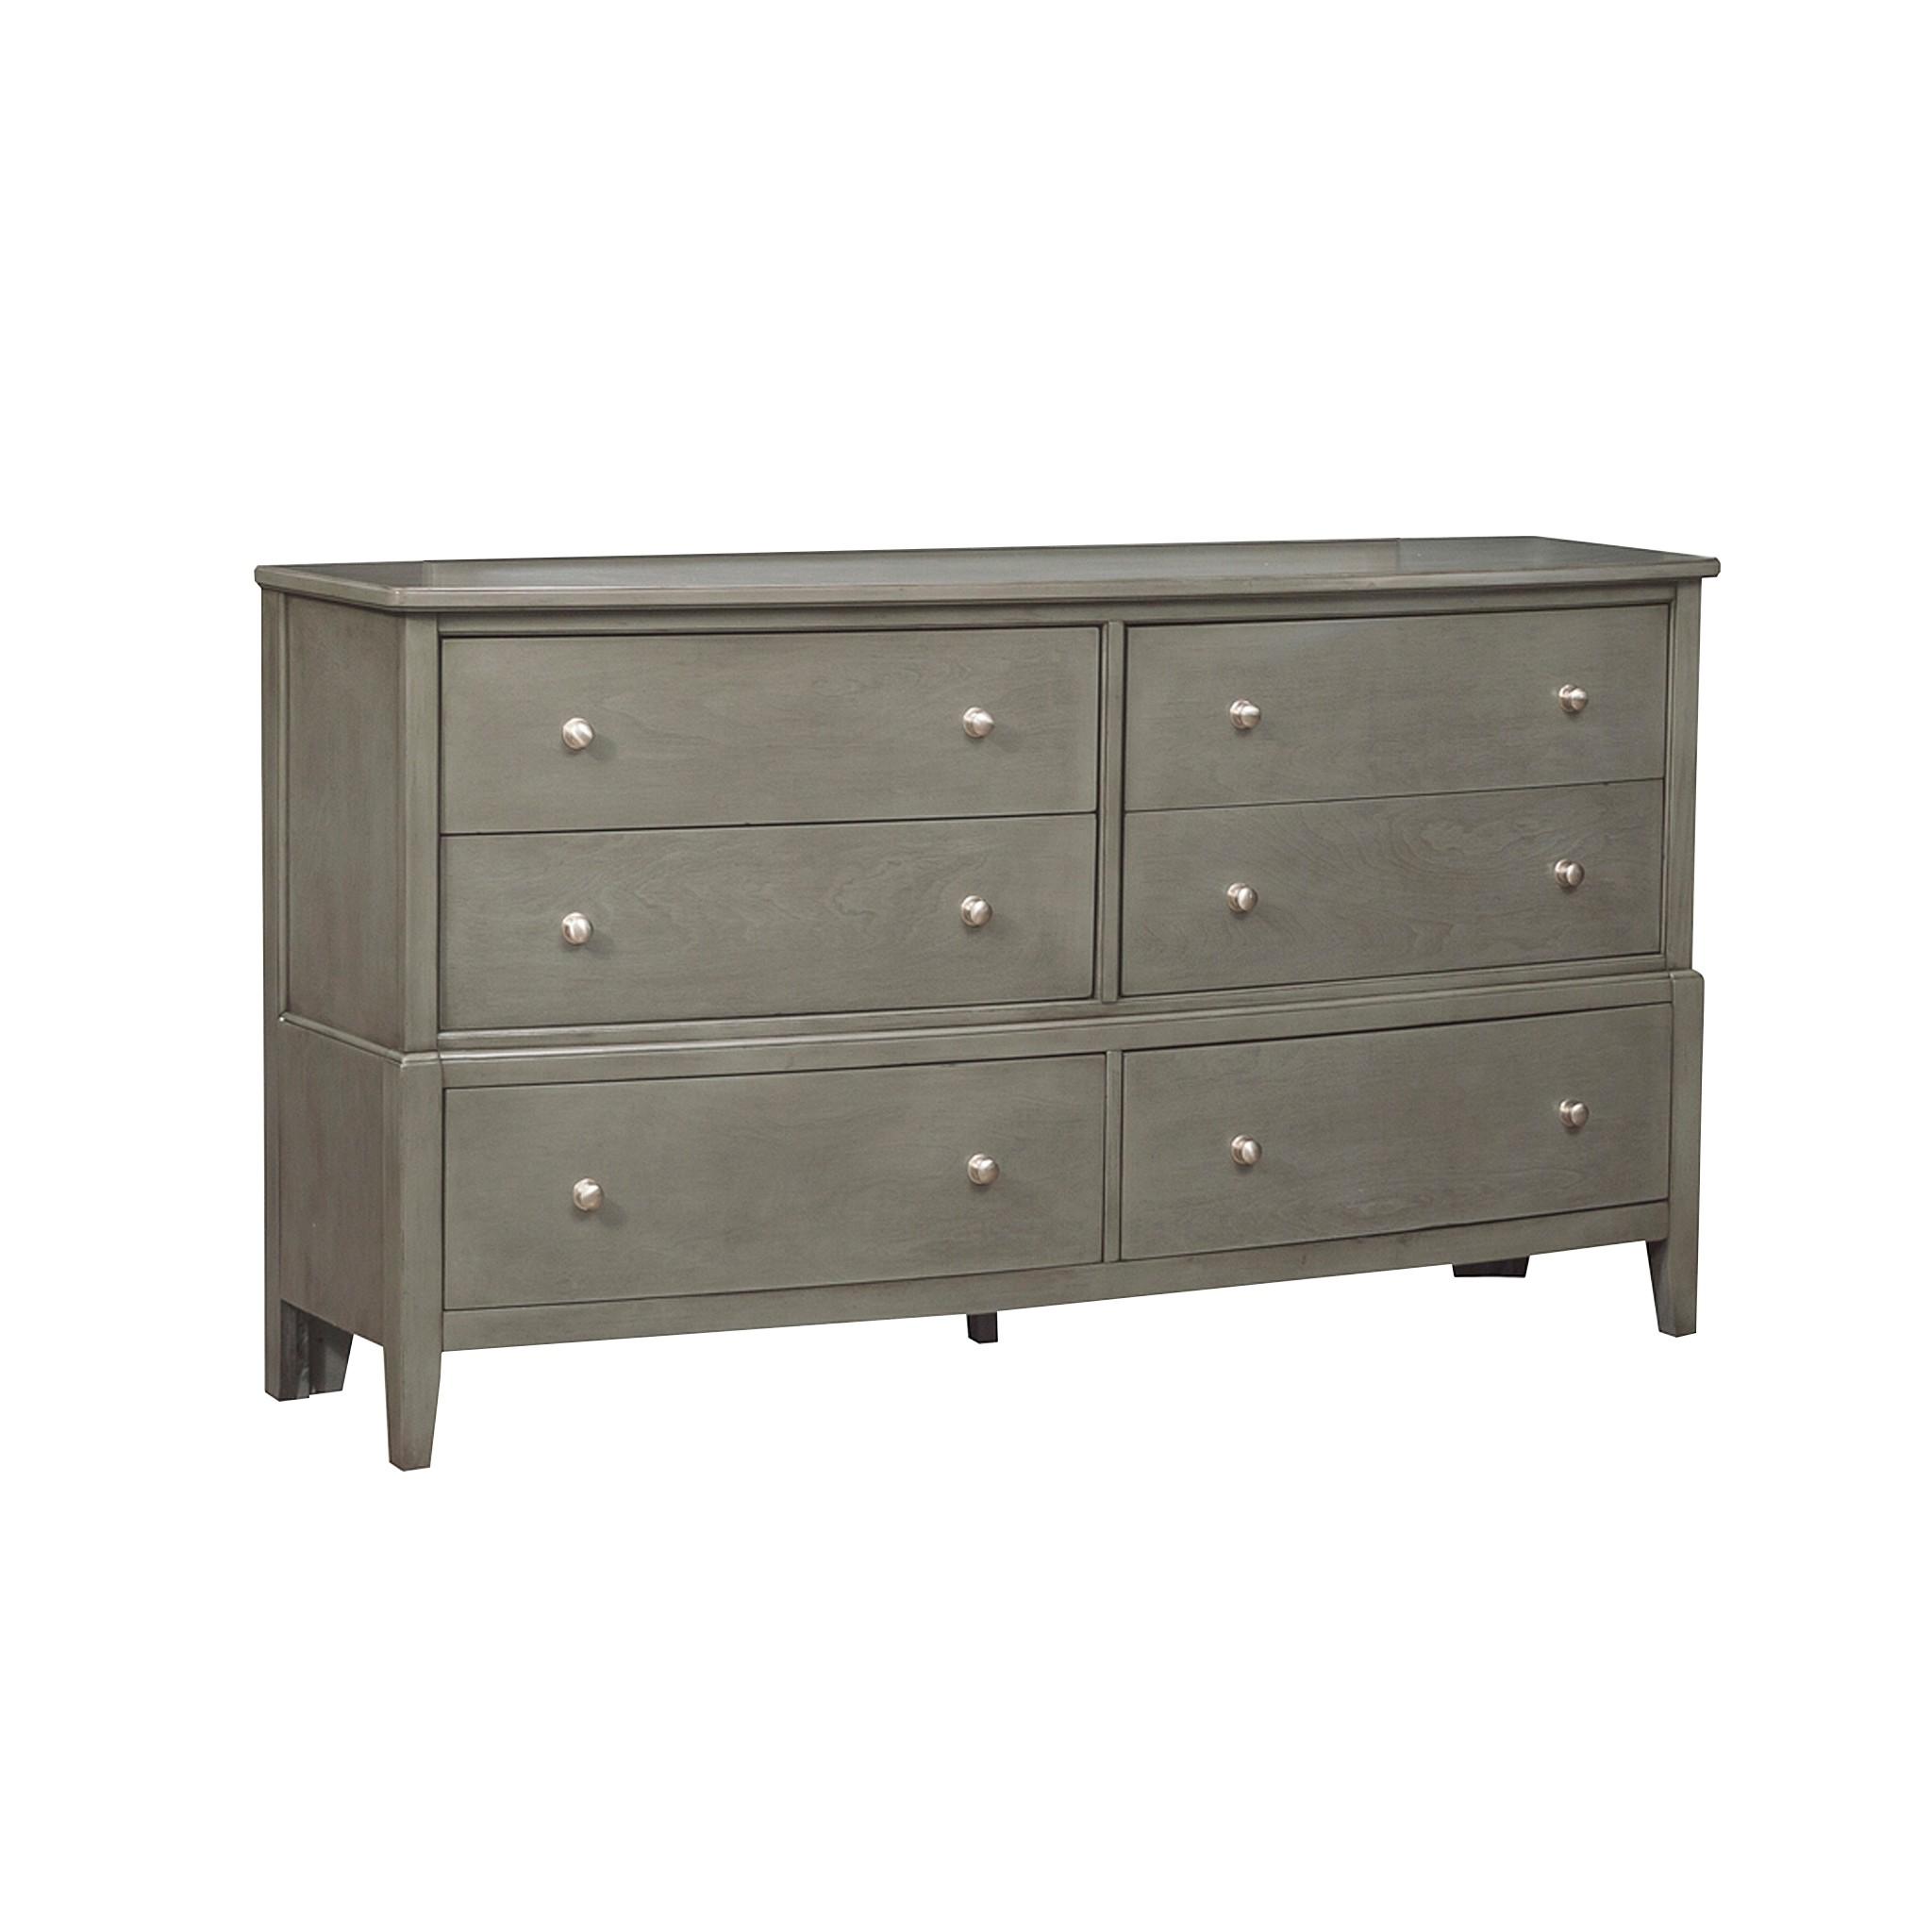 Transitional Dresser 1730GY-5 Cotterill 1730GY-5 in Gray 